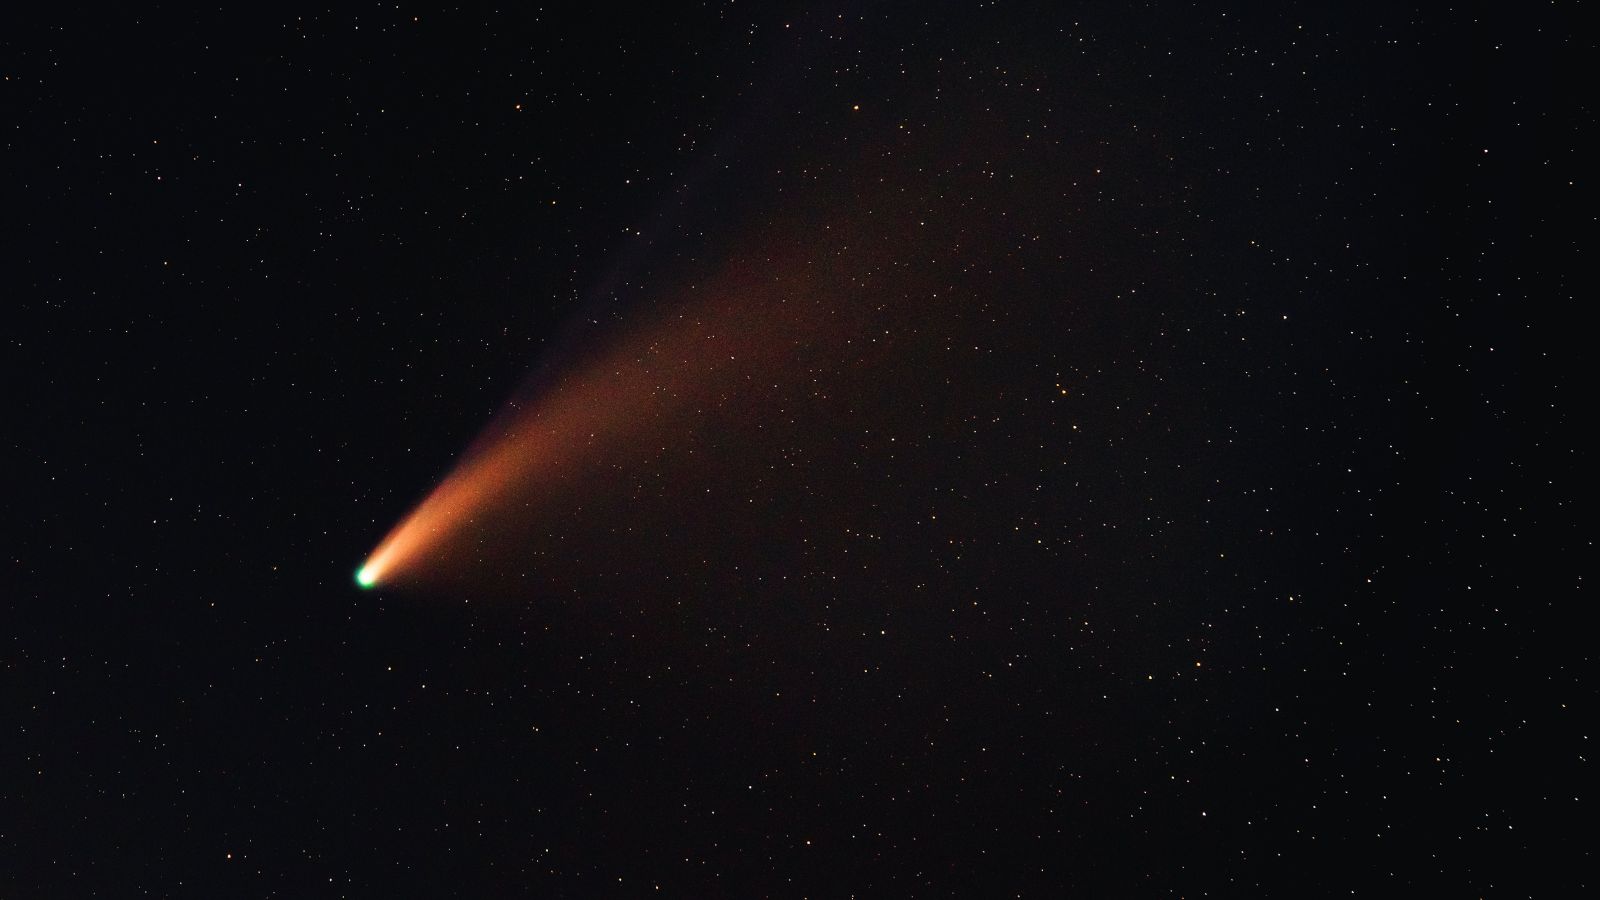 comets-bouncing-from-one-planet-to-another-can-spread-life-in-the-universe